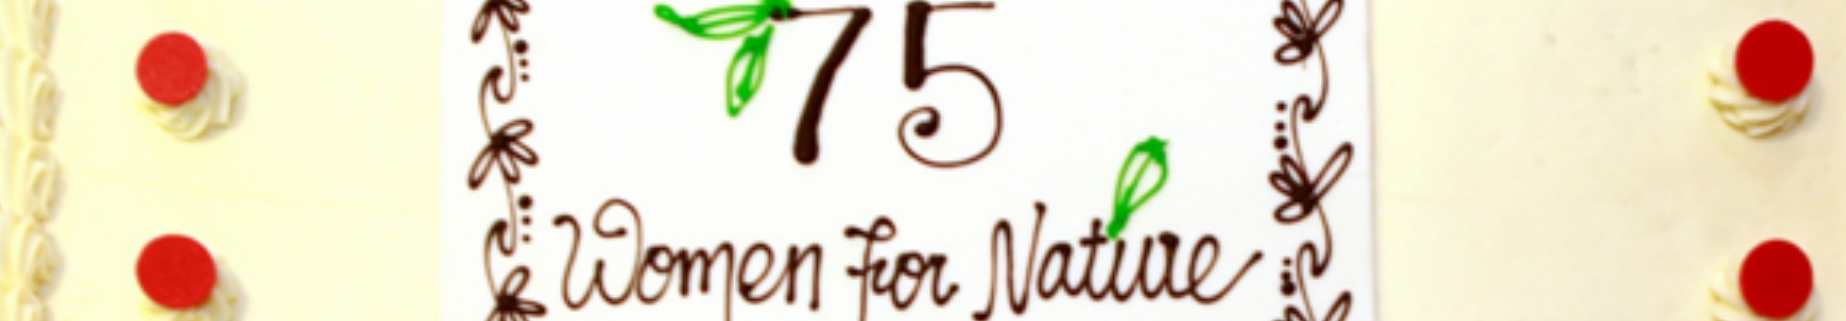 Image of 75th Anniversary Cake for women for nature